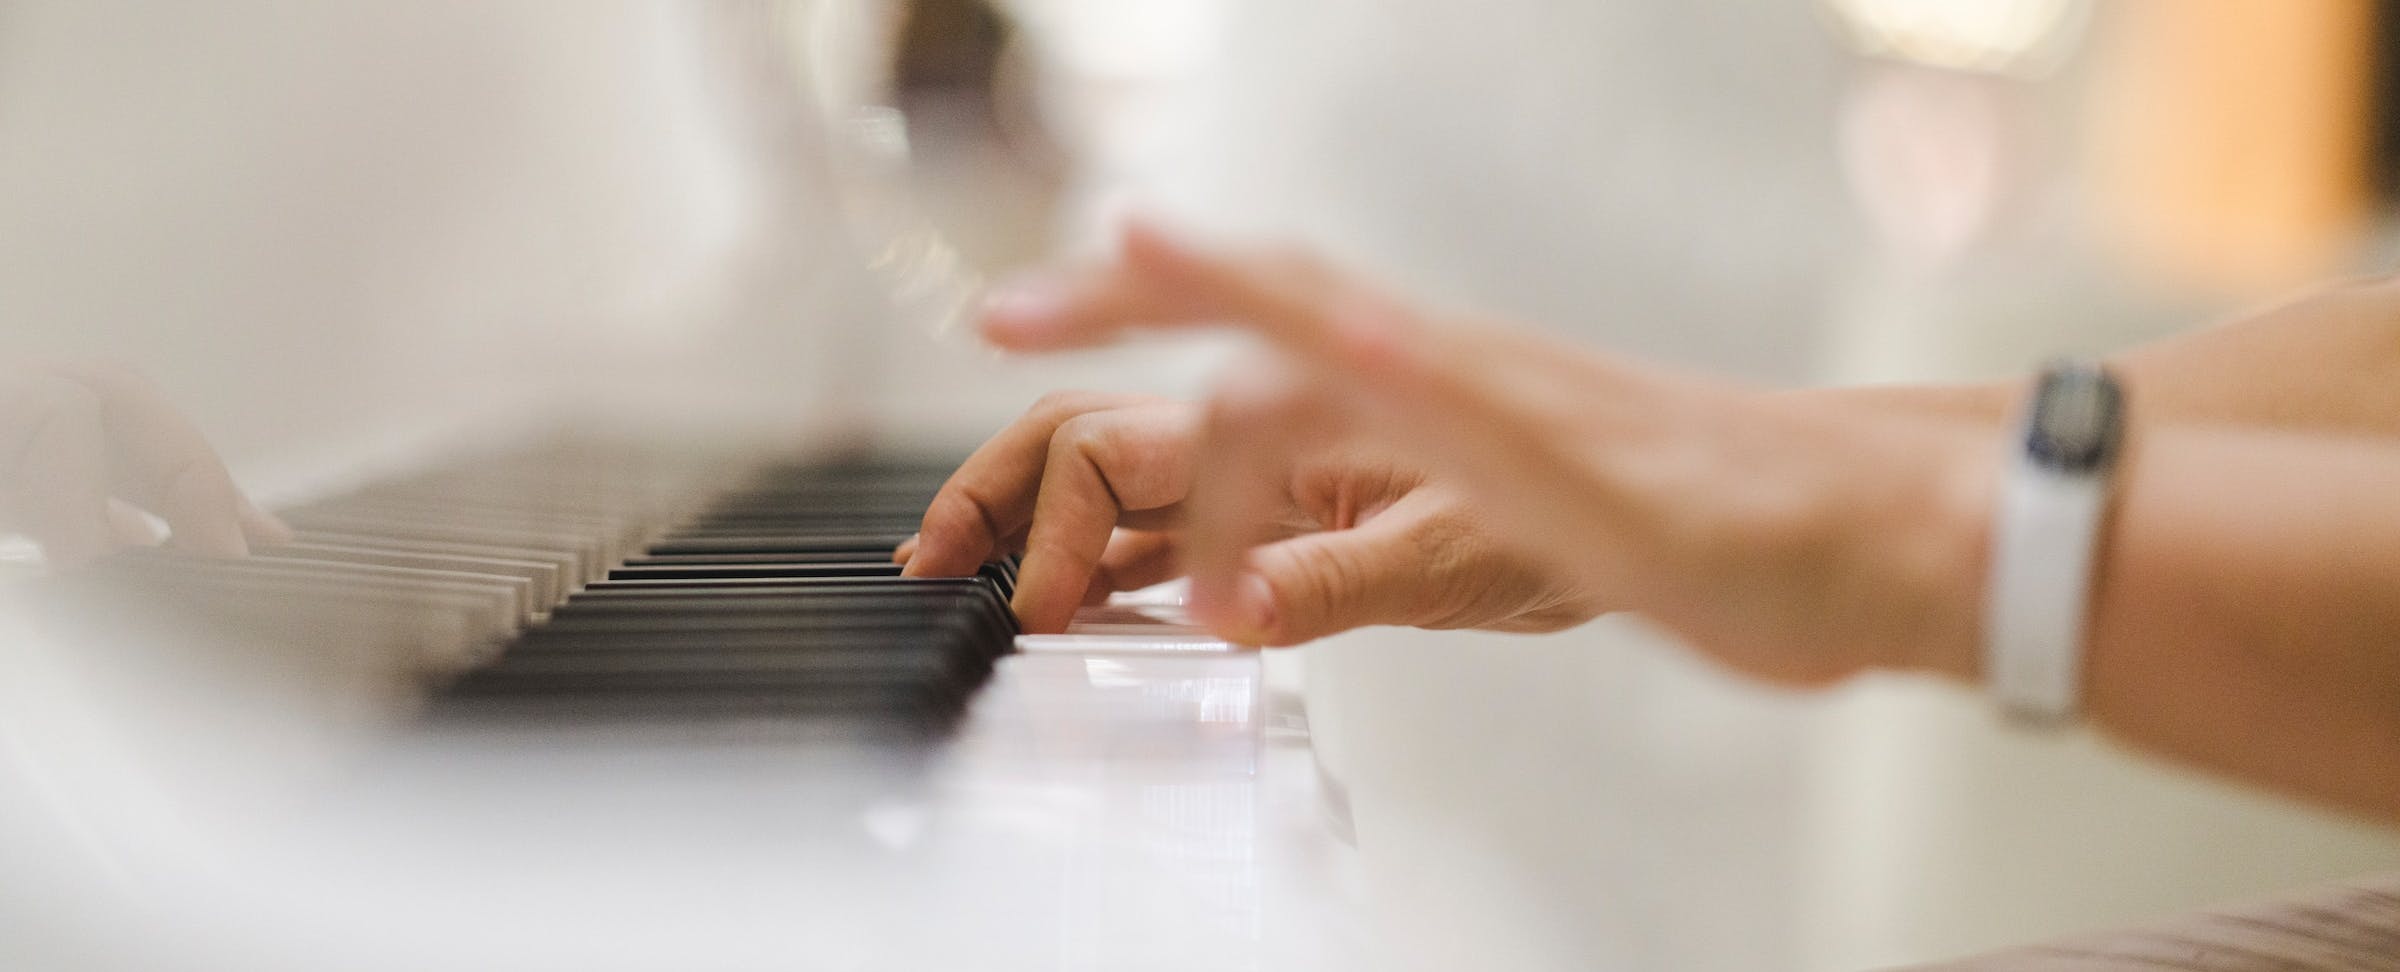 Playing on white piano